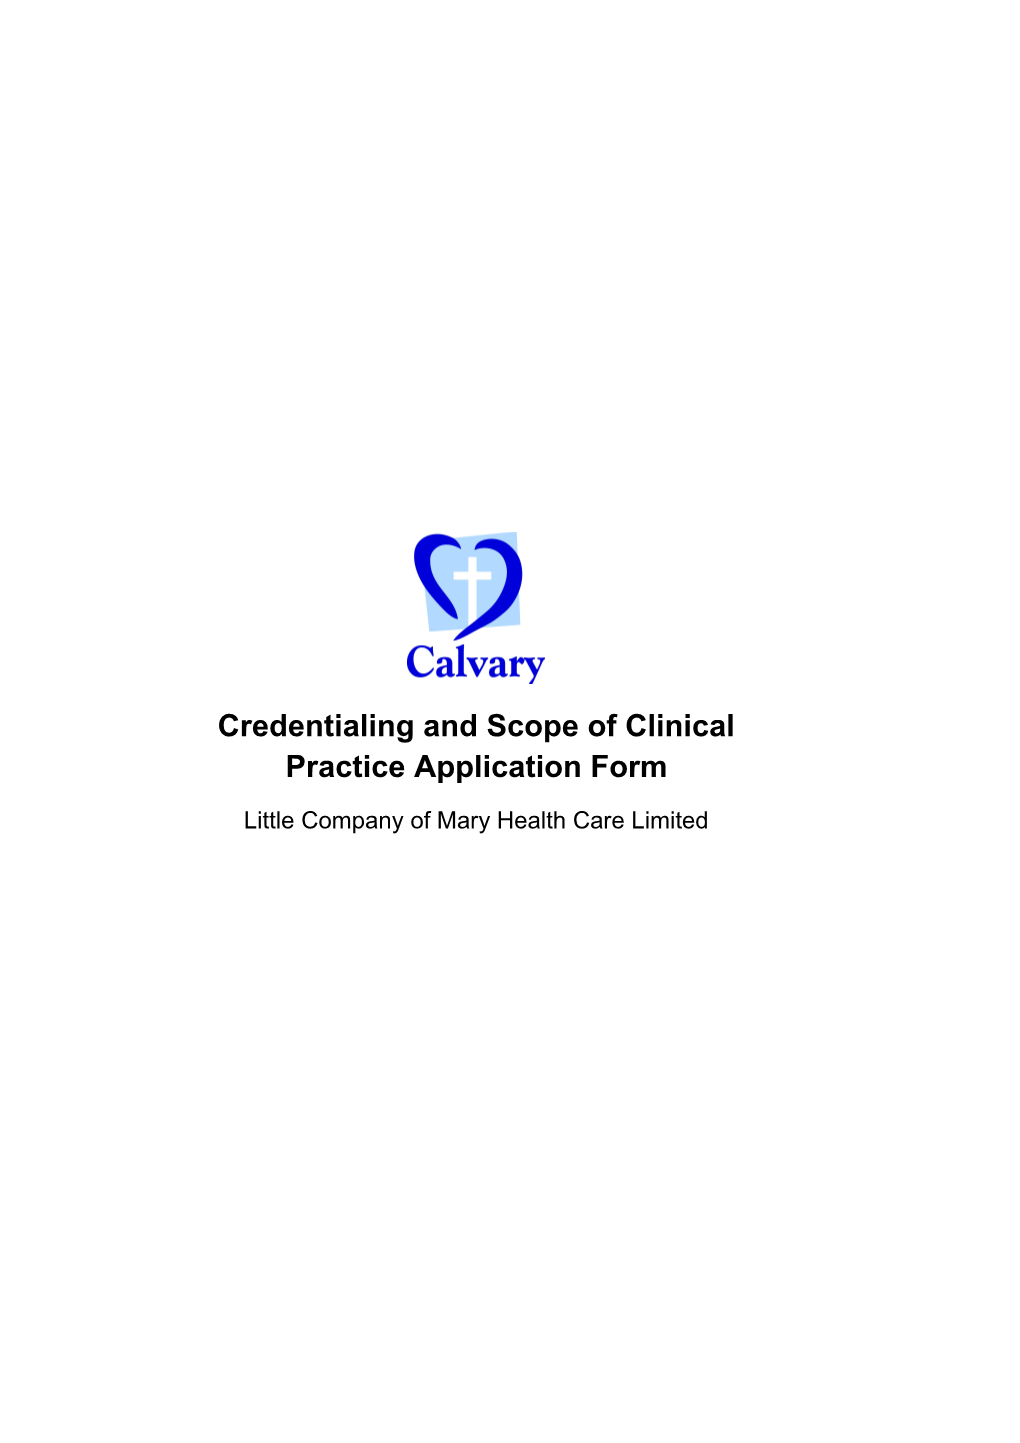 Calvary Services - Credentialling and Scope of Clinical Practice Application Form